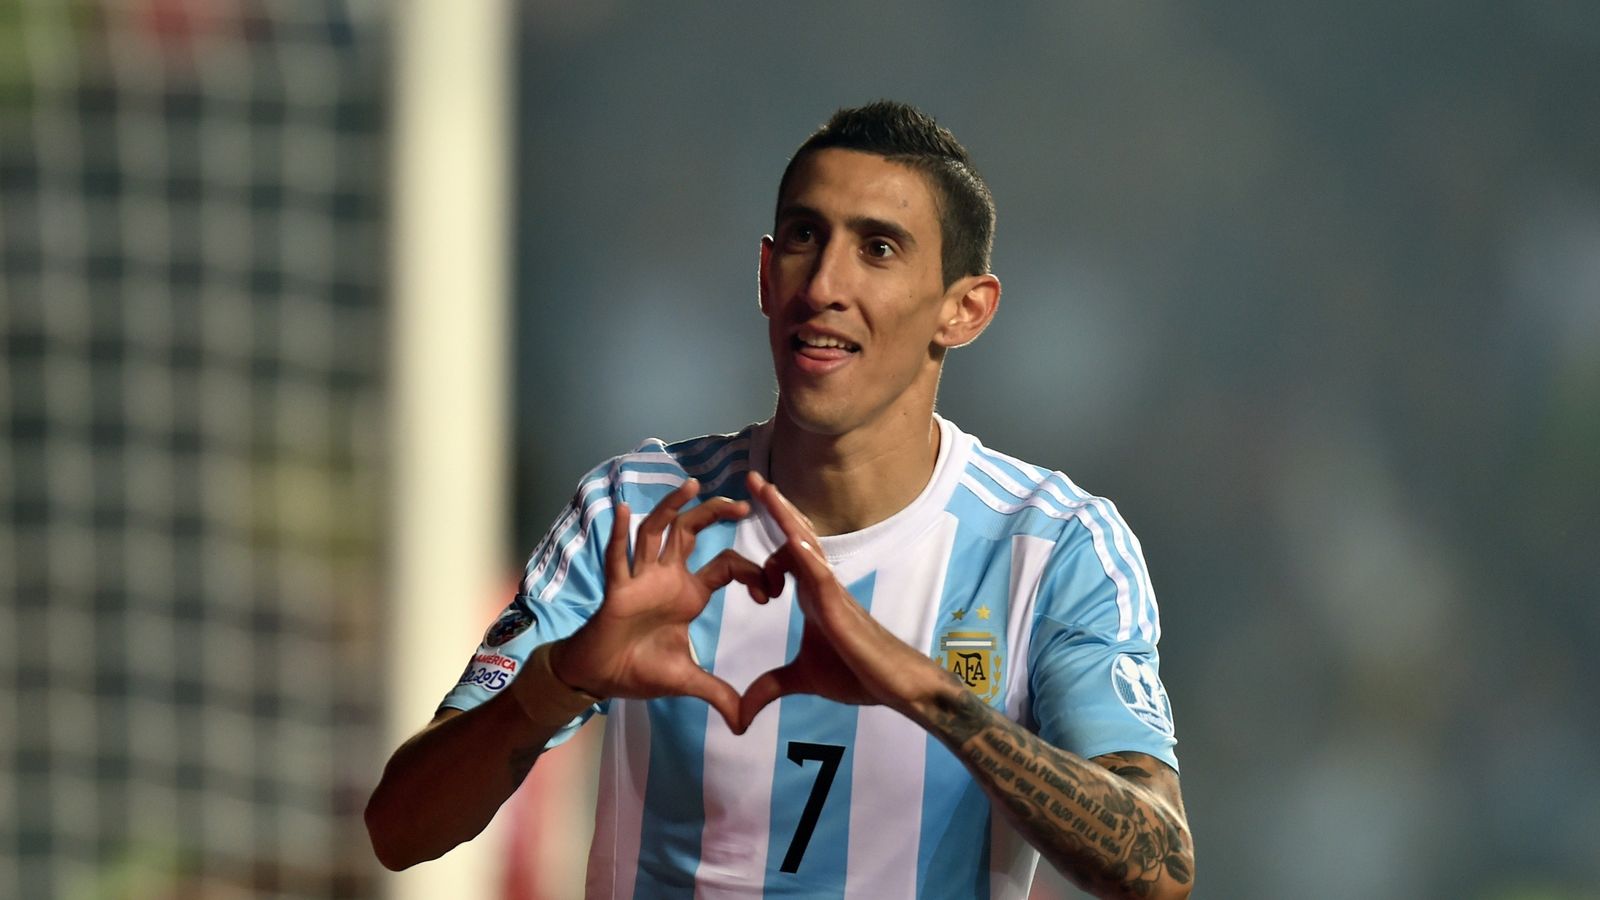 Angel Di Maria's Copa America heroics with Argentina could benefit Manchester United